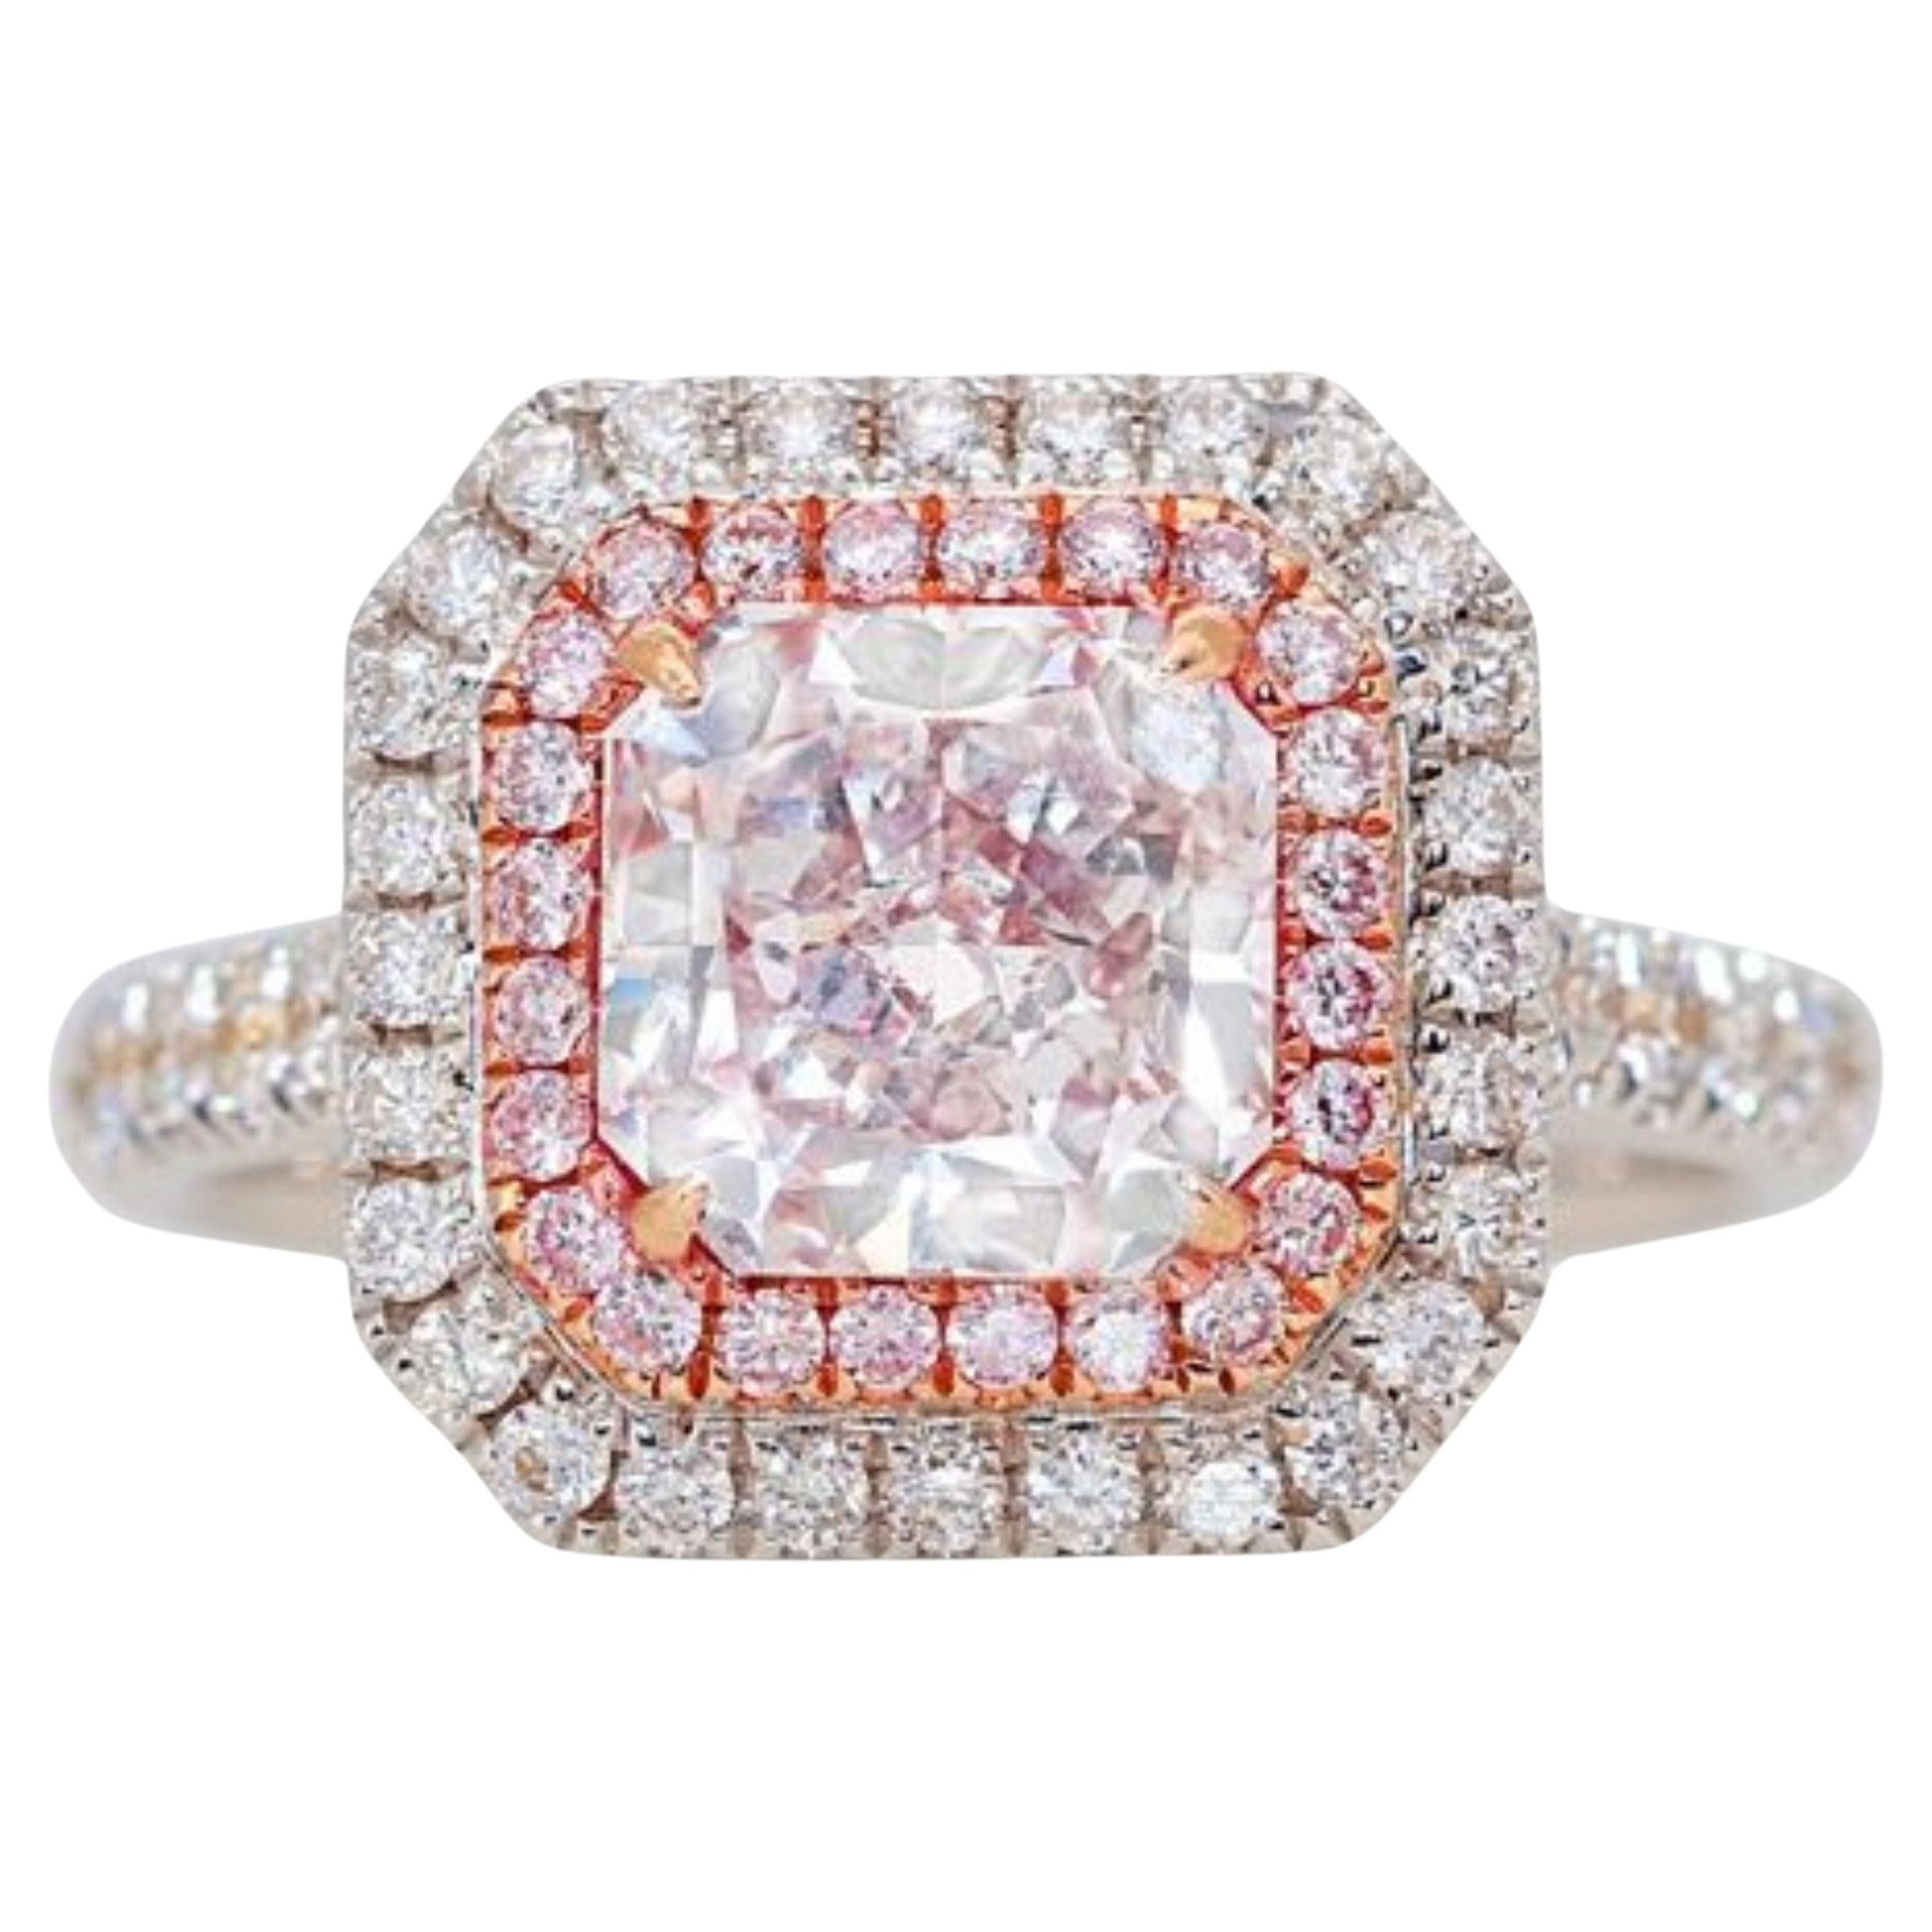 Captivating 1.86ct. Square Radiant Halo Diamond Ring For Sale